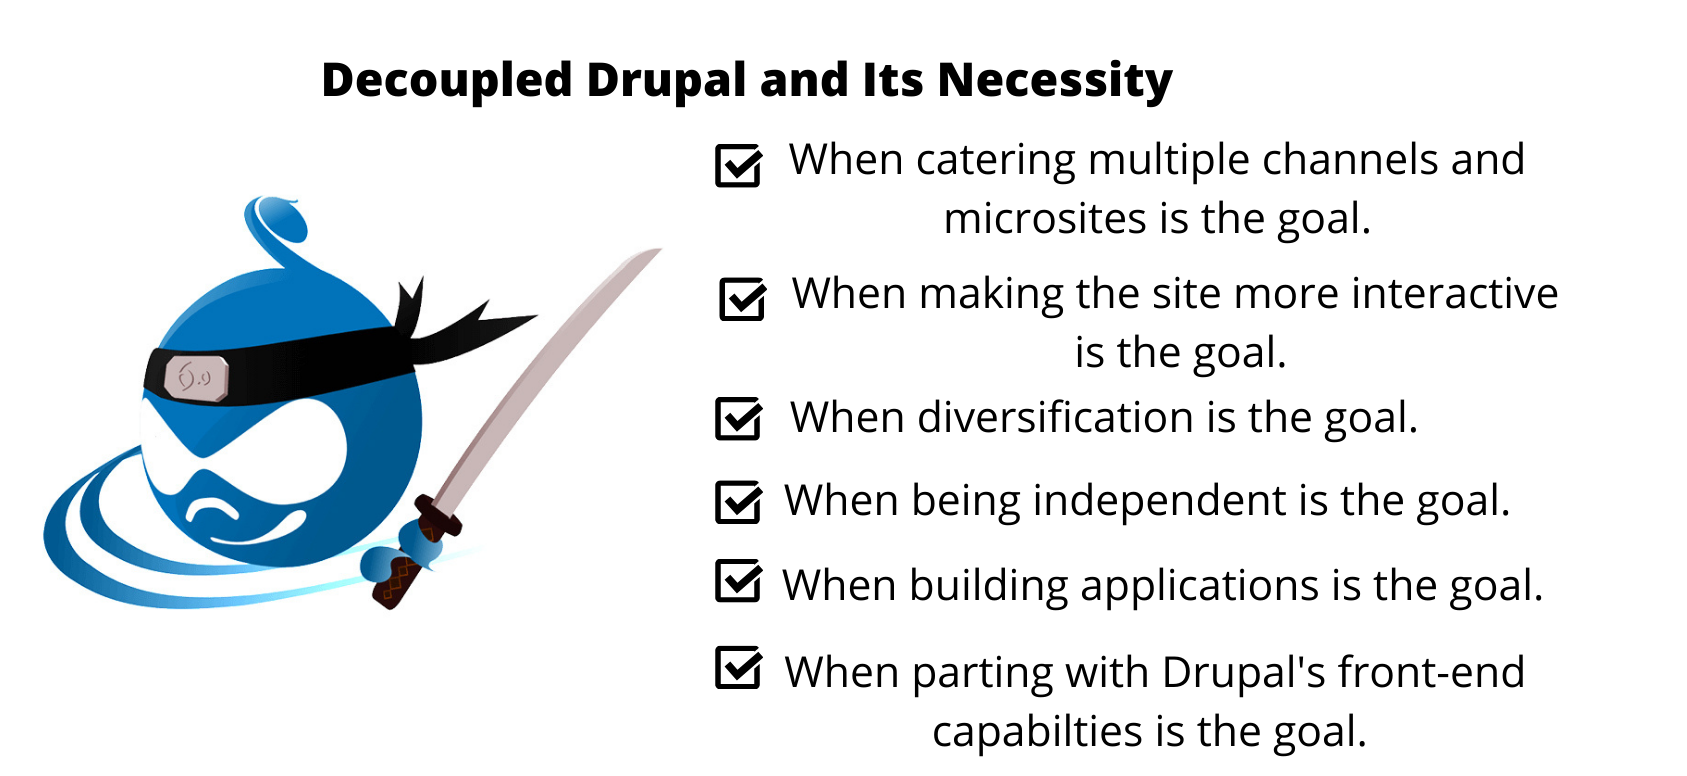 The Drupal logo is on the bottom left and the need for Decoupled Drupal architecture is highlighted in the rest of the space.